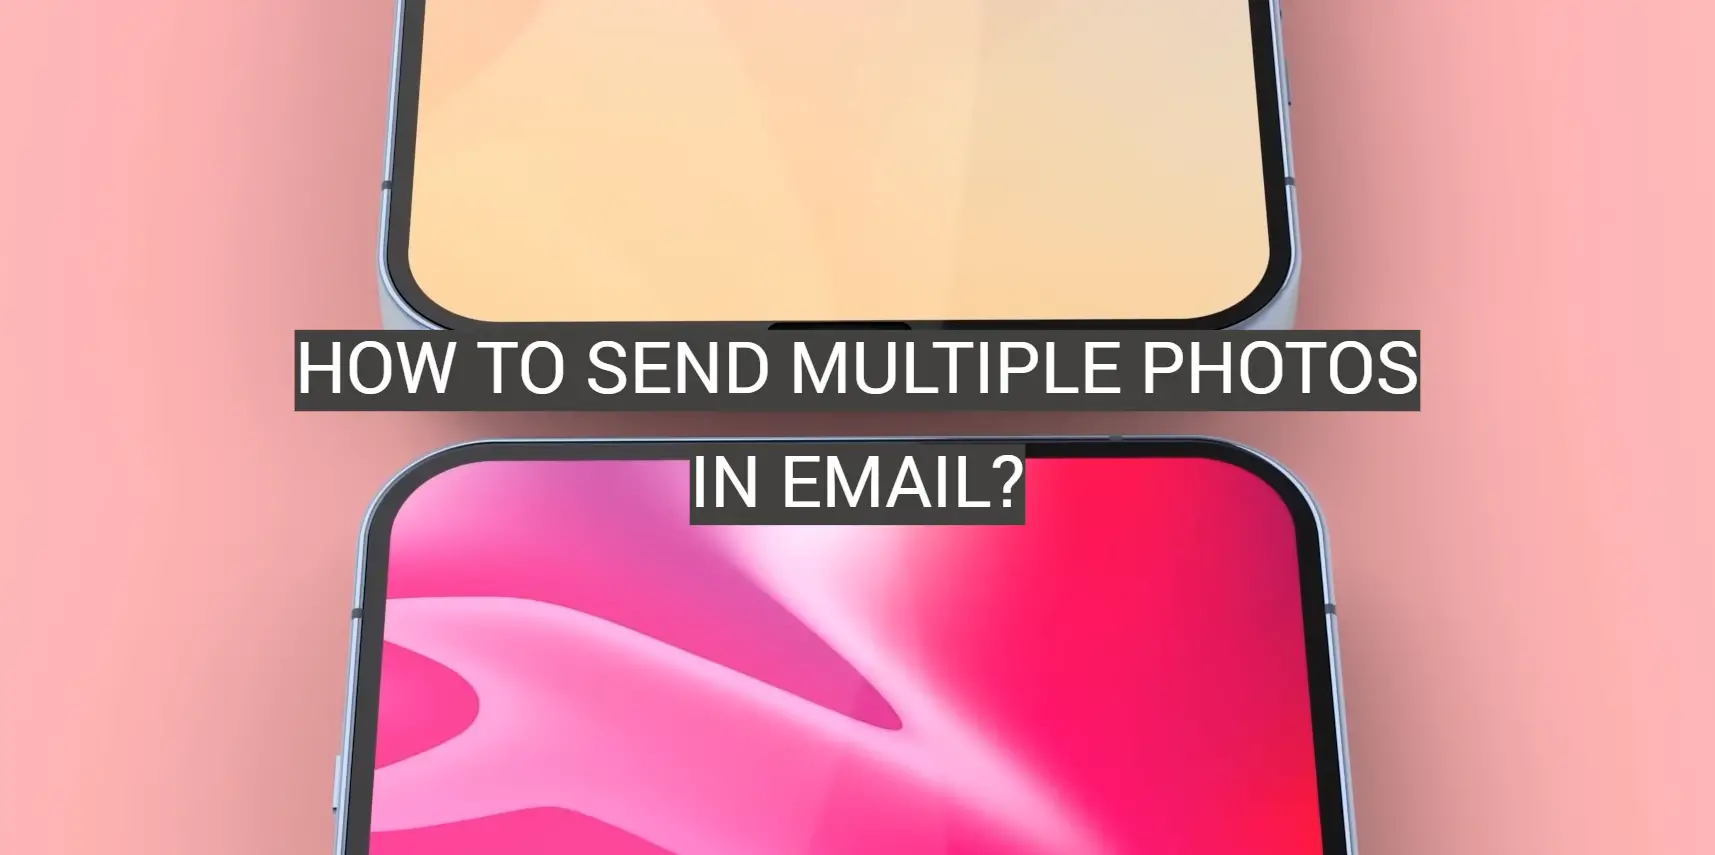 How to Send Multiple Photos in Email?